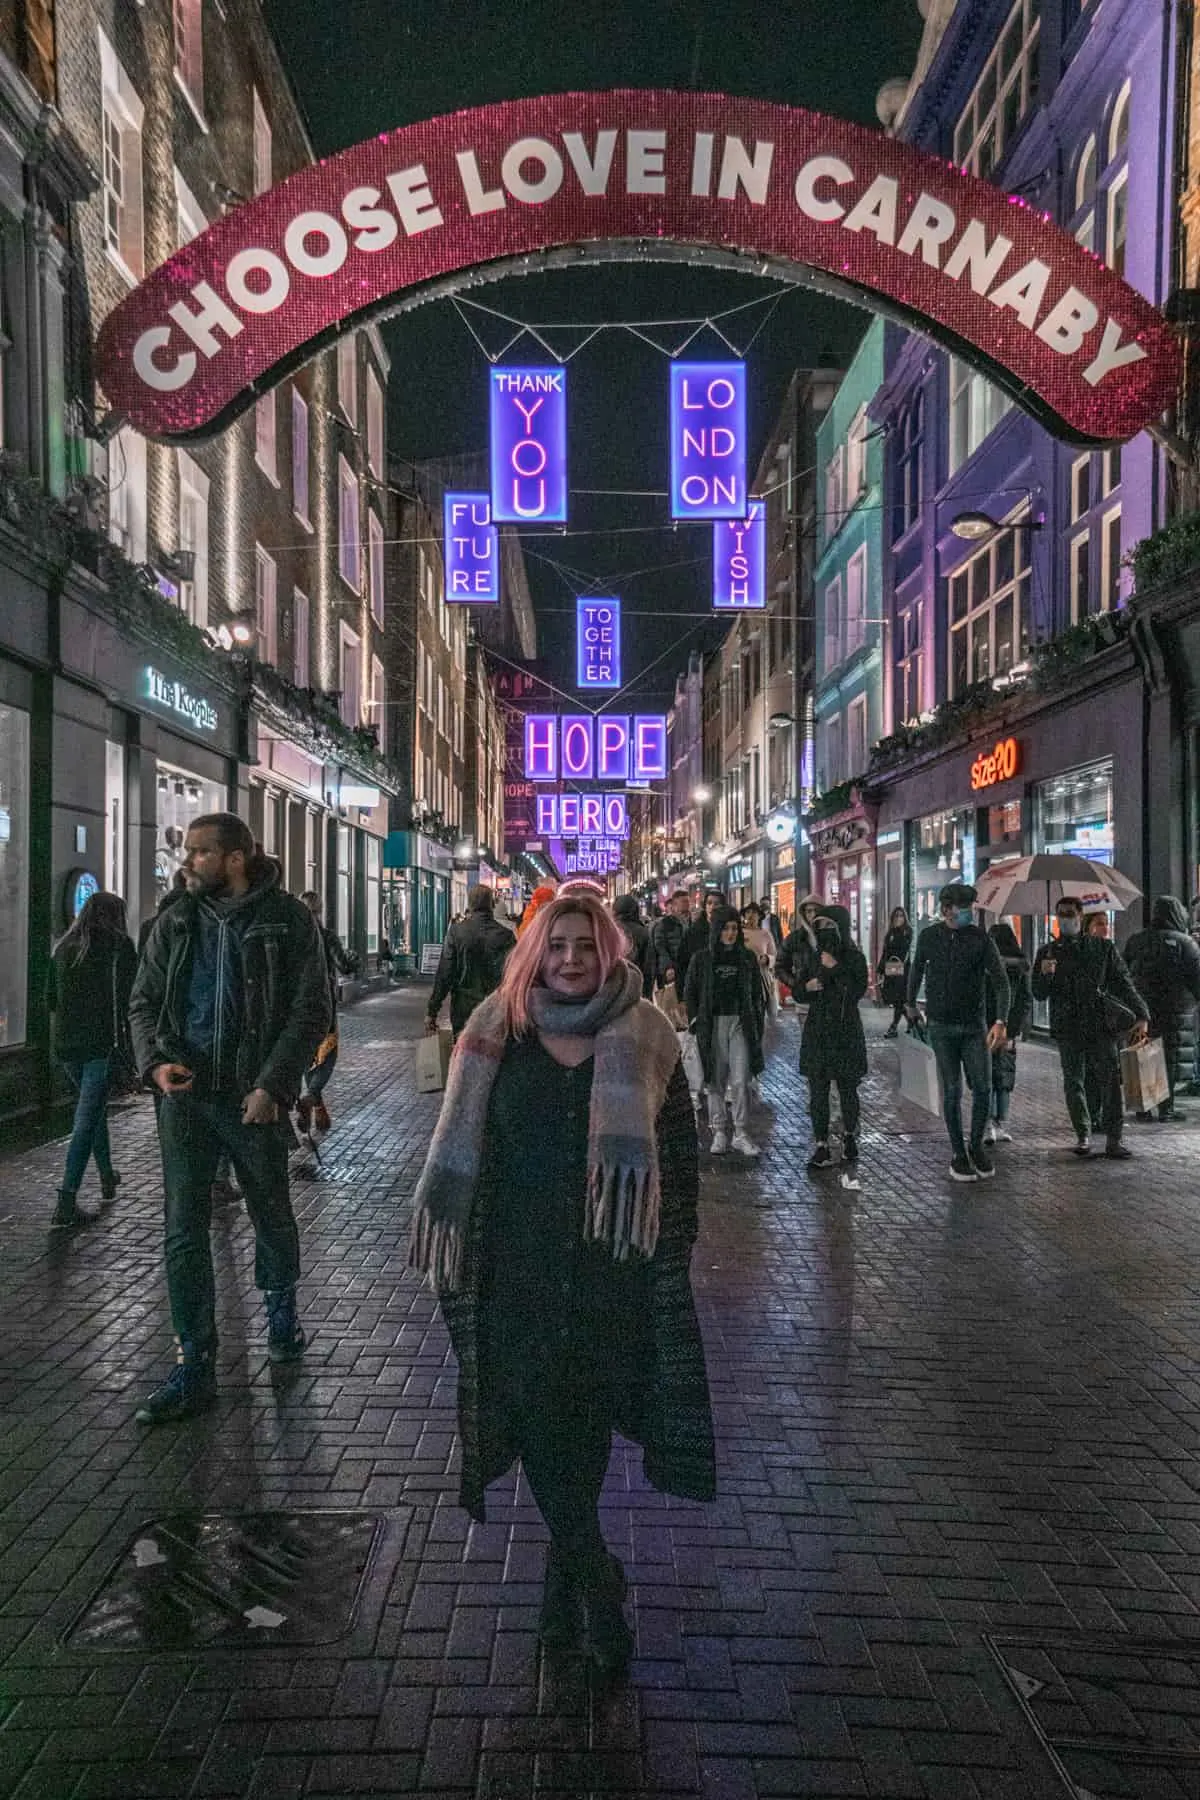 Kat standing in front of the choose love in Carnaby Christmas lights